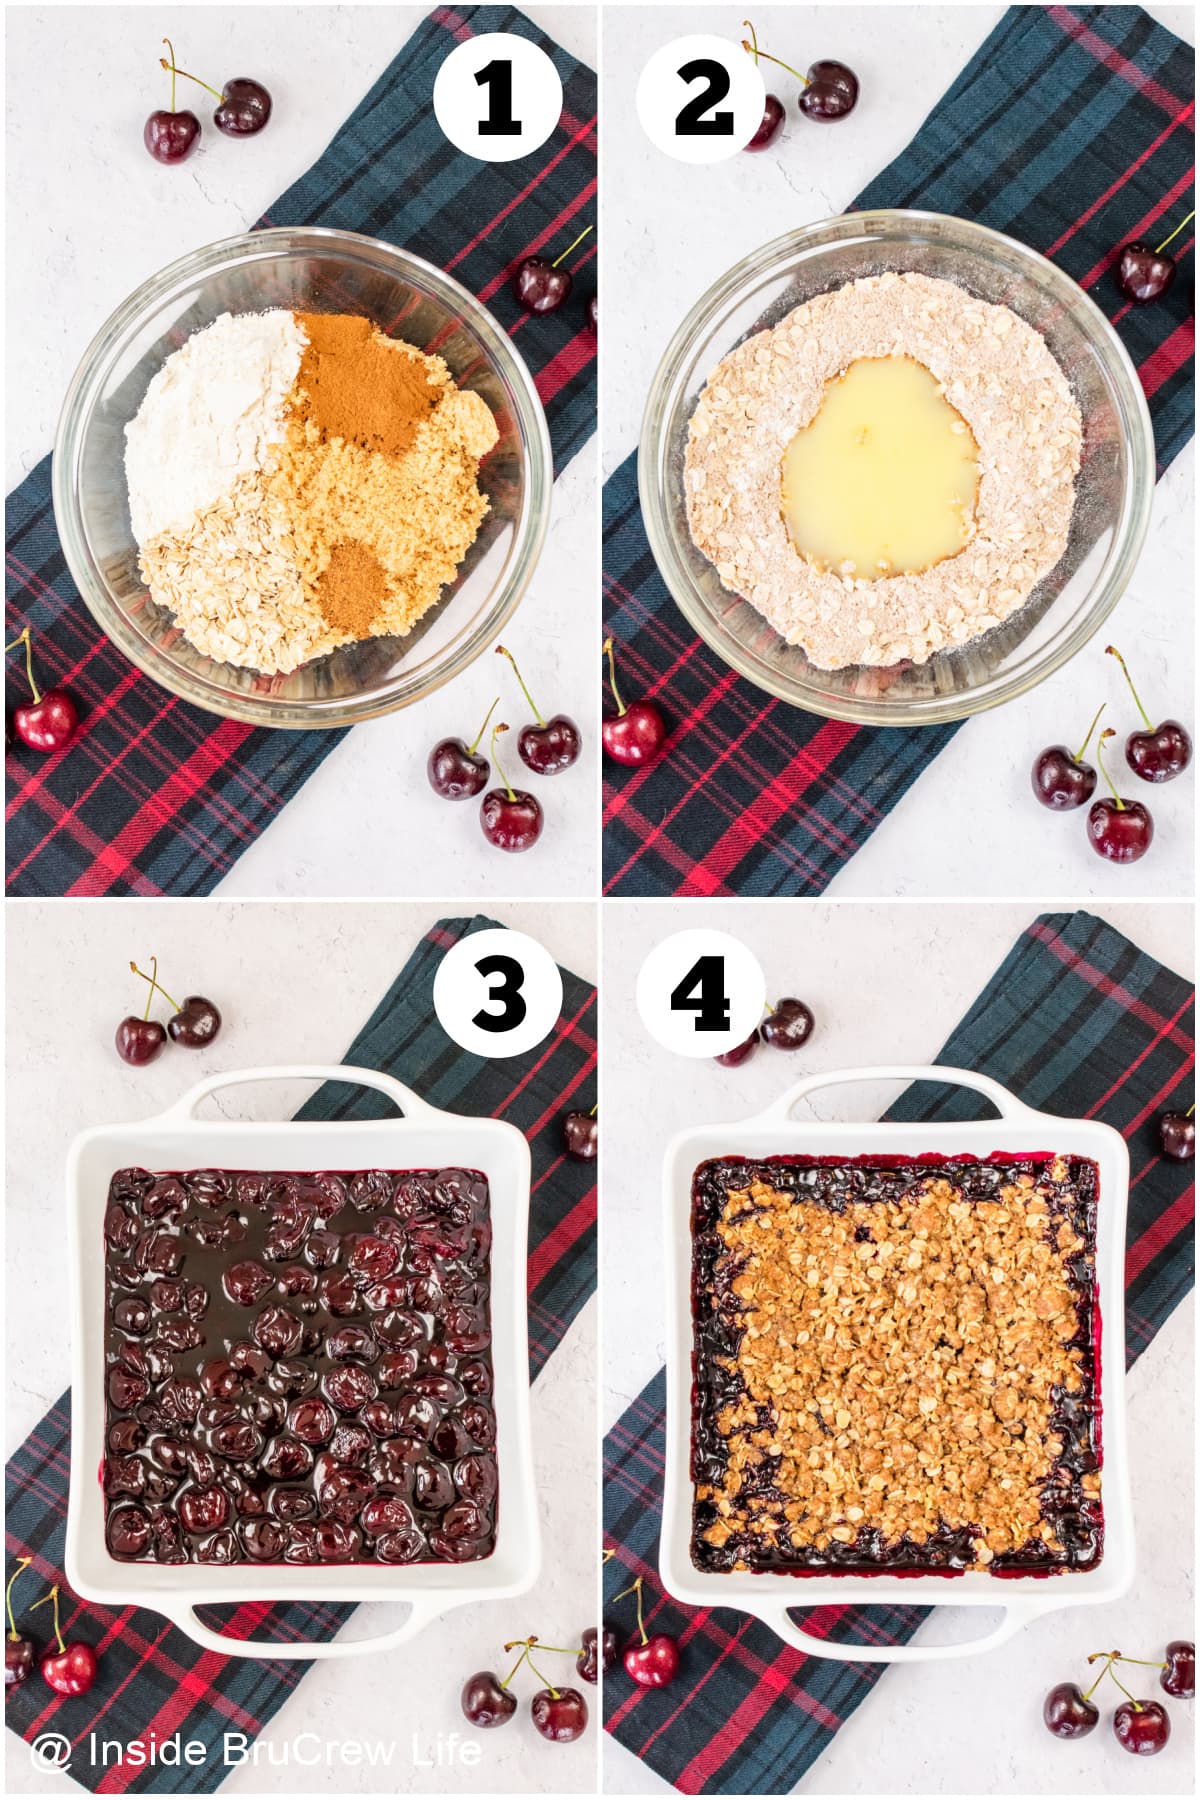 Four pictures collaged together showing how to make a fruit crisp.